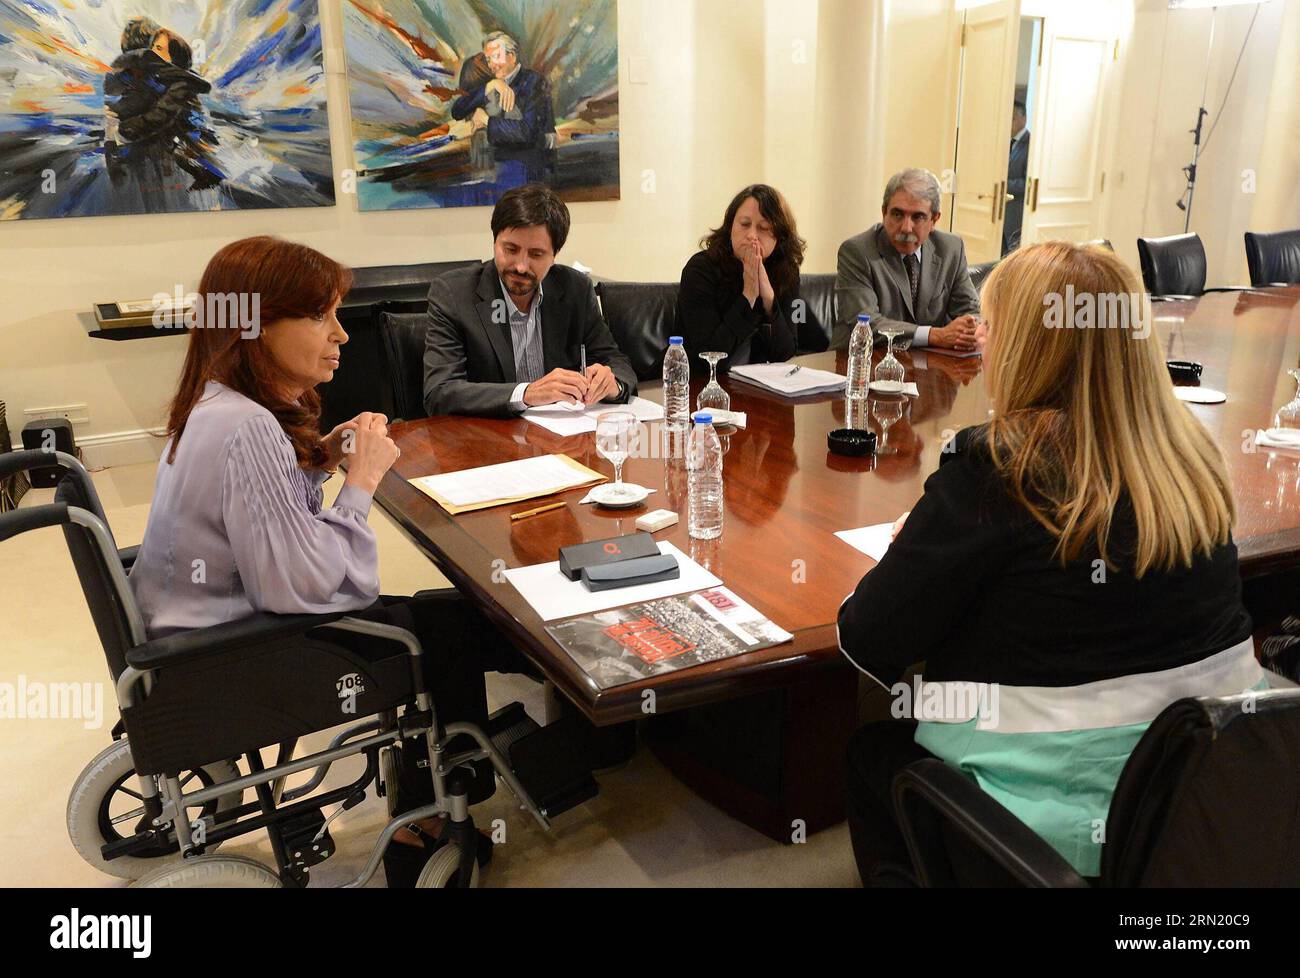 (150128) -- BUENOS AIRES, Jan. 27, 2015 -- Argentina s President Cristina Fernandez de Kirchner (L) and the Secretary of Presidency Anibal Fernandez (R, back) attend a meeting with members of Memoria Activa civil asociation at Presidential Residency of Olivos in Buenos Aires, Argentina, on Jan. 27, 2015. Presidency/TELAM) (rhj) (lmz) ARGETINA-BUENOS AIRES-POLITICS-FERNANDEZ e TELAM PUBLICATIONxNOTxINxCHN   Buenos Aires Jan 27 2015 Argentina S President Cristina Fernandez de Kirchner l and The Secretary of Presidency Anibal Fernandez r Back attend a Meeting With Members of MEMORIA activa Civil Stock Photo